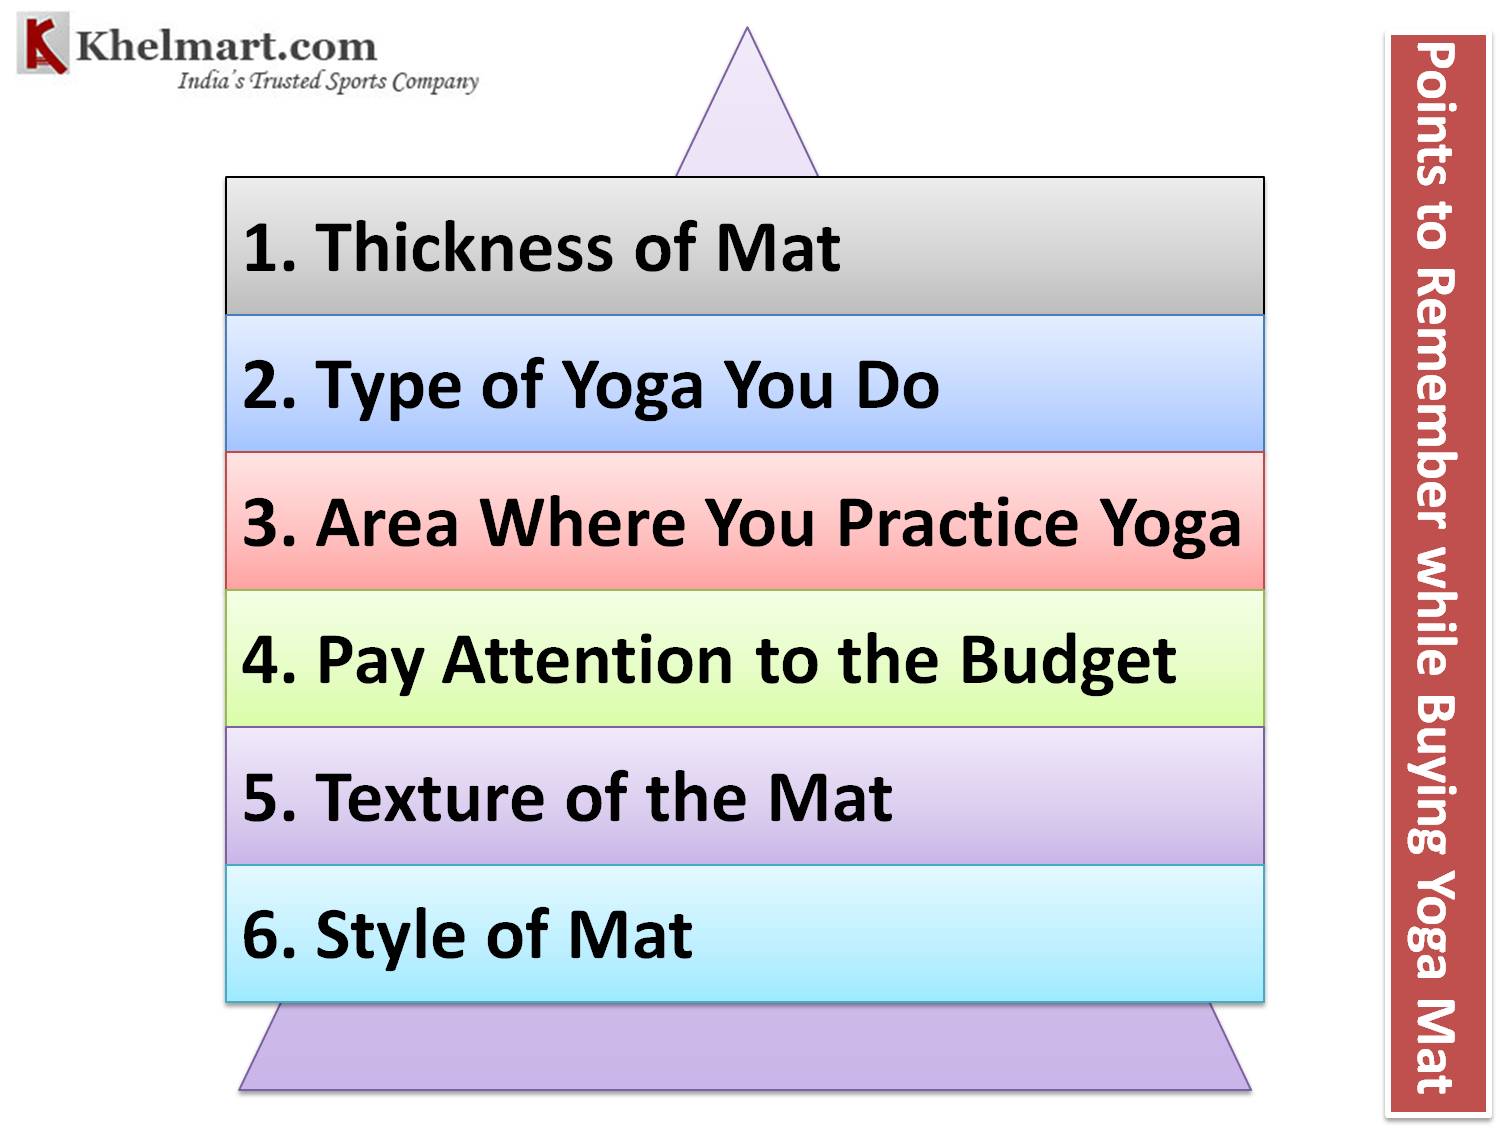 Points_to_Remember_While_Buying_Yoga_Mat.jpg